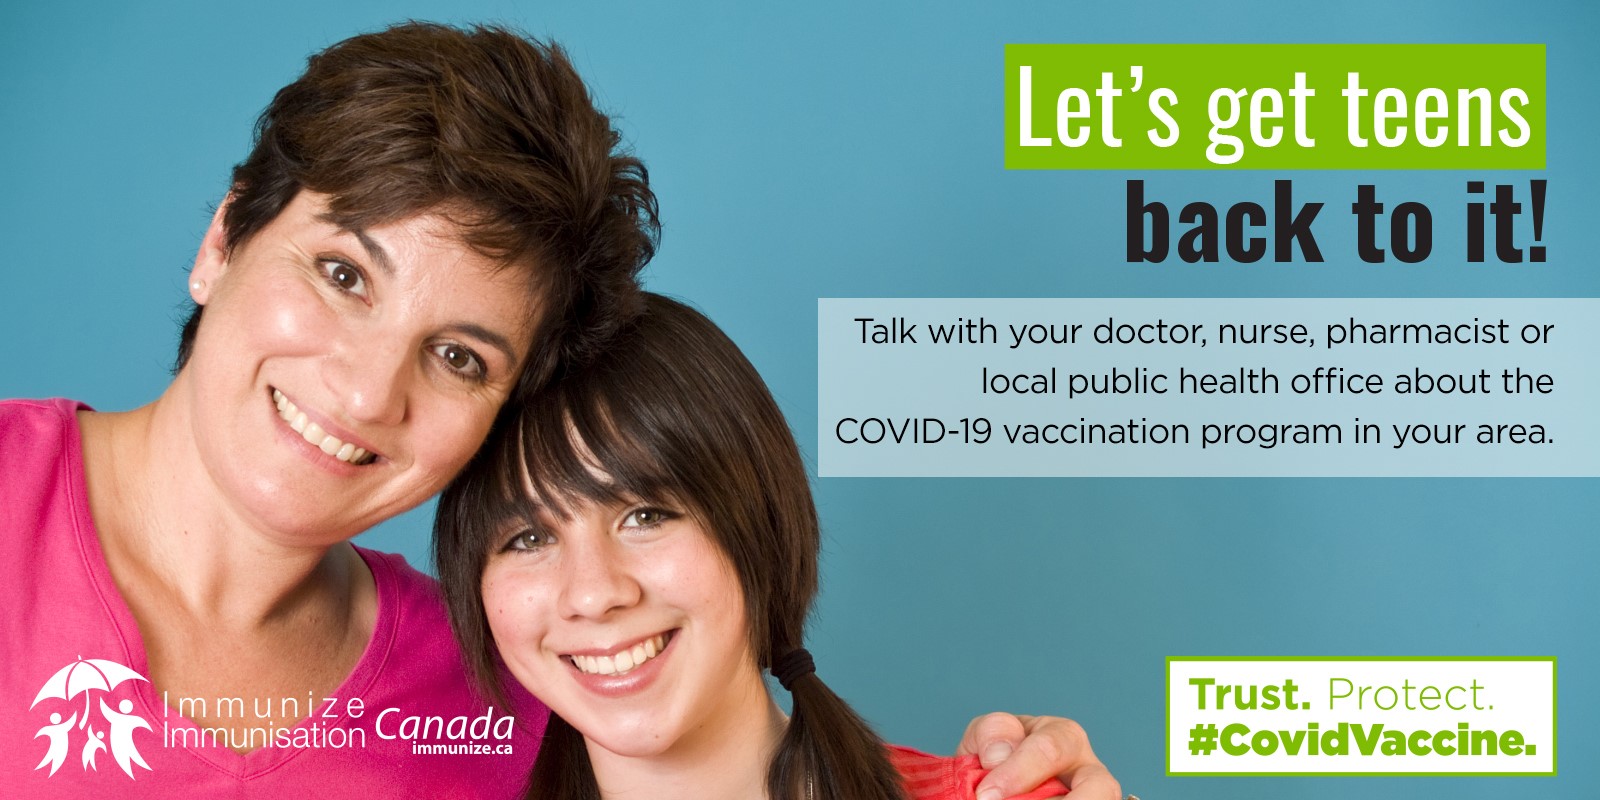 Let's get teens back to it: COVID-19 vaccination